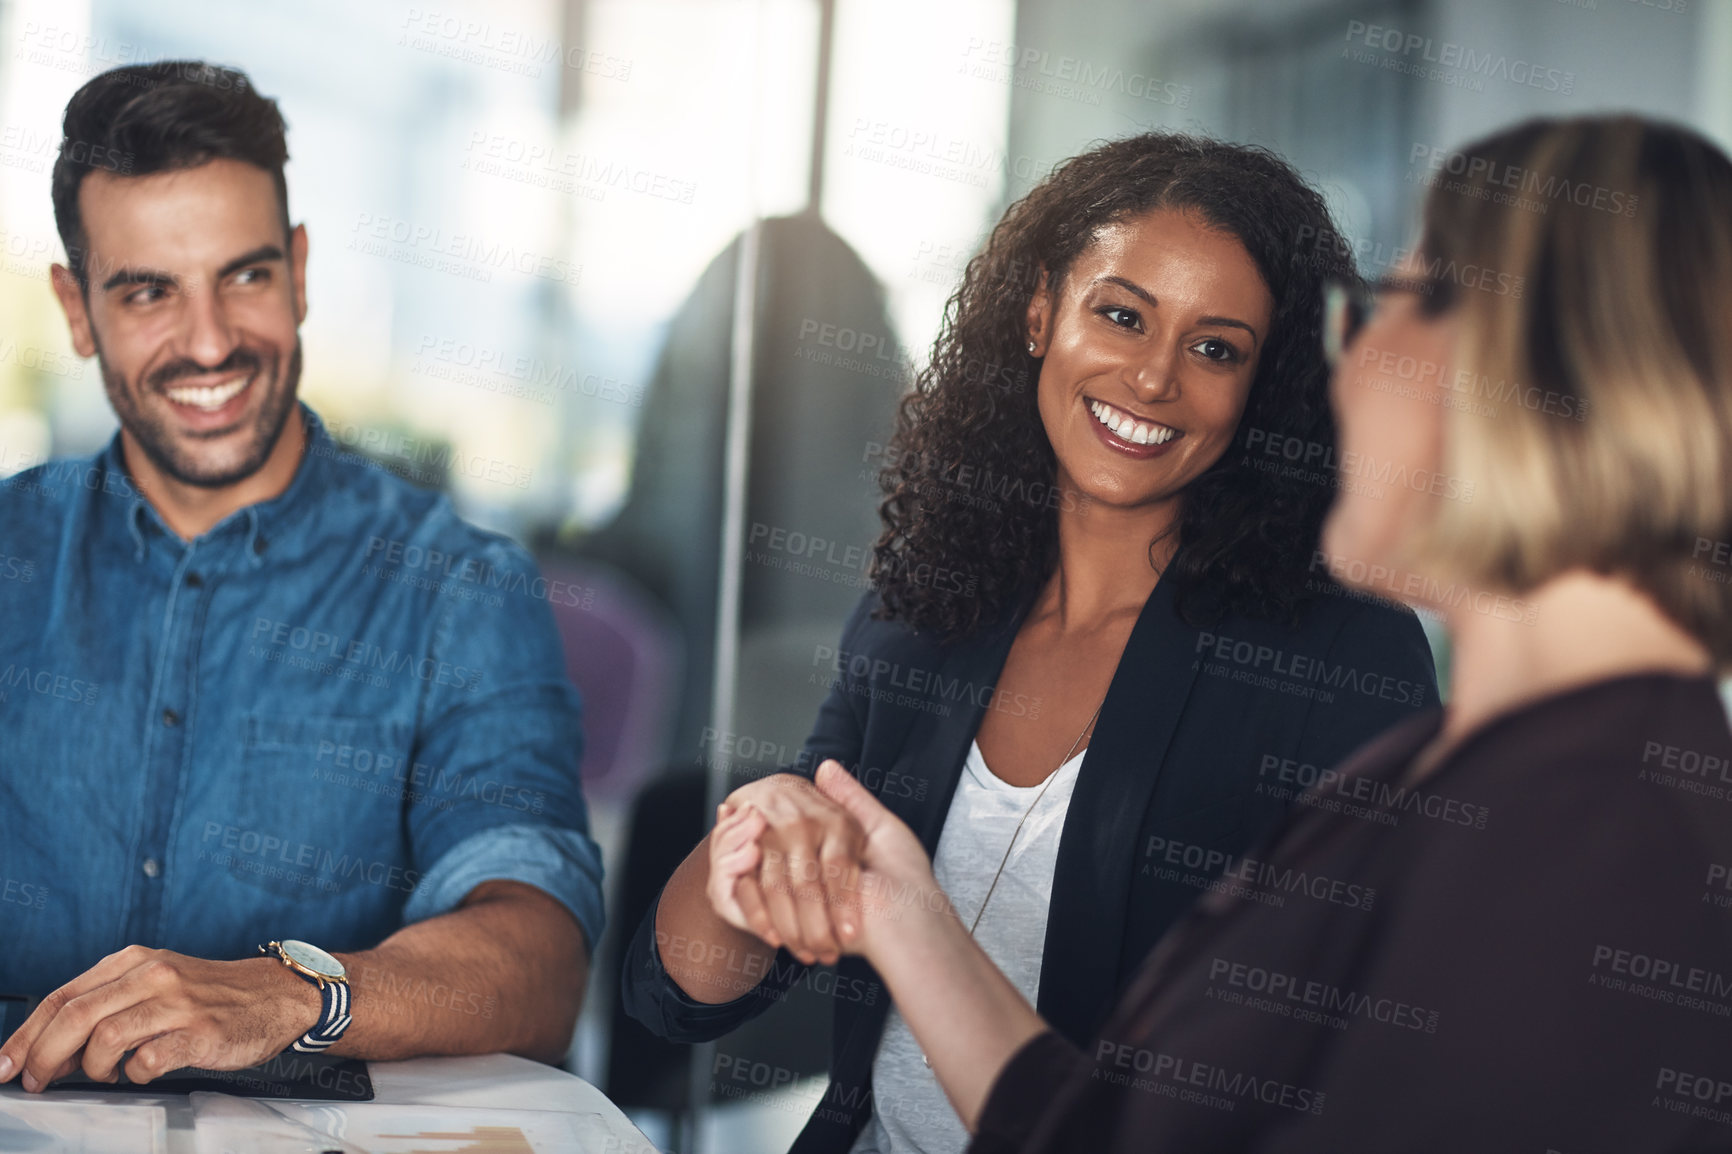 Buy stock photo Handshake, collaboration and business deal while introducing, congratulating and wishing a colleague good luck for leadership promotion. Diverse businesspeople celebrating growth and team contract